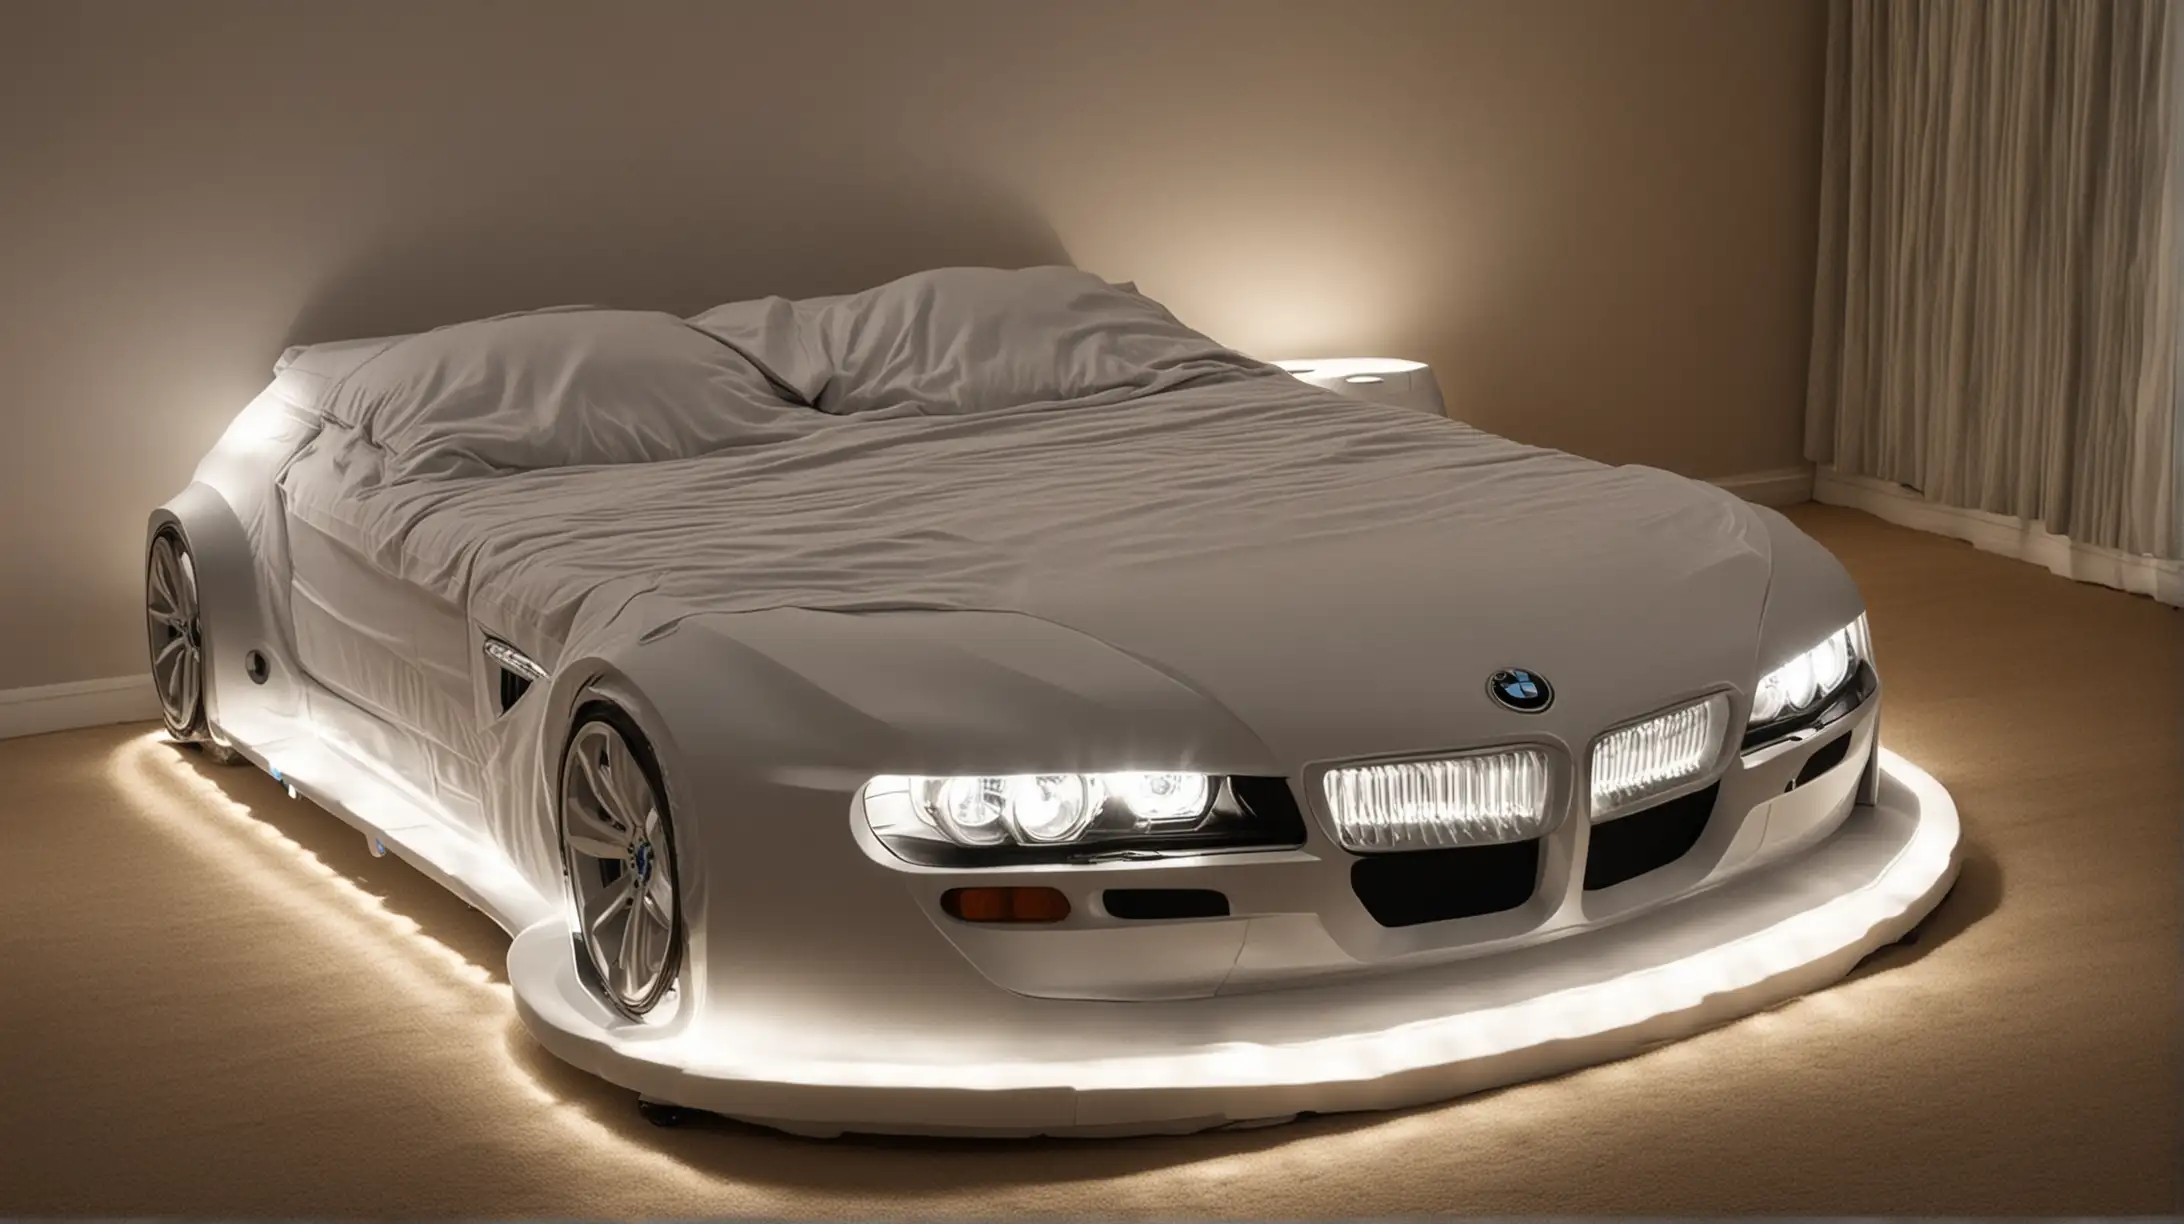 Luxury Double Bed Shaped as BMW Car with Headlights On